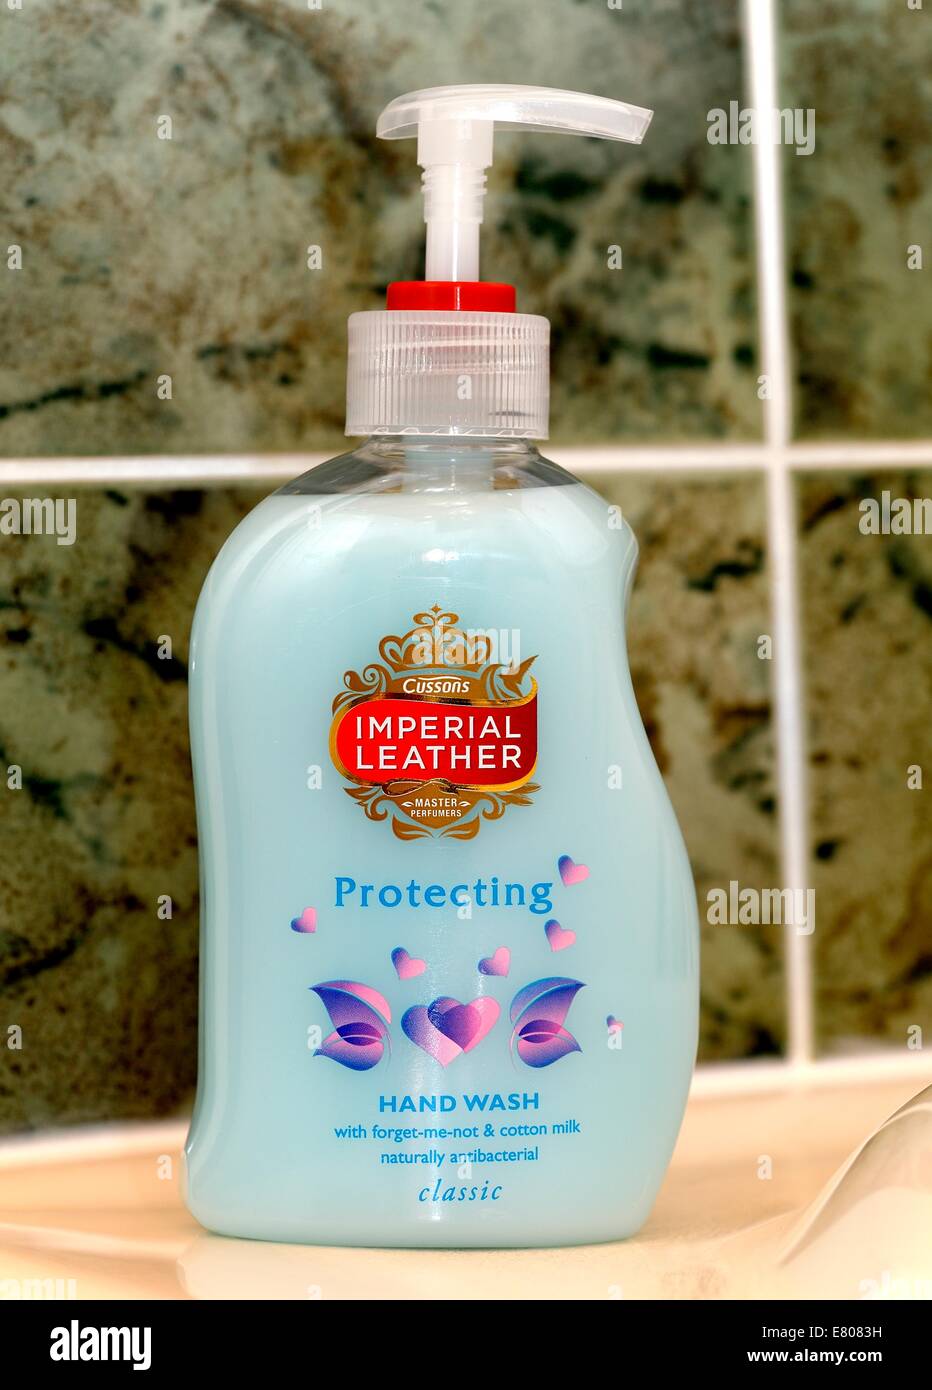 Imperial Leather branded protecting hand wash in a bathroom setting england uk Stock Photo